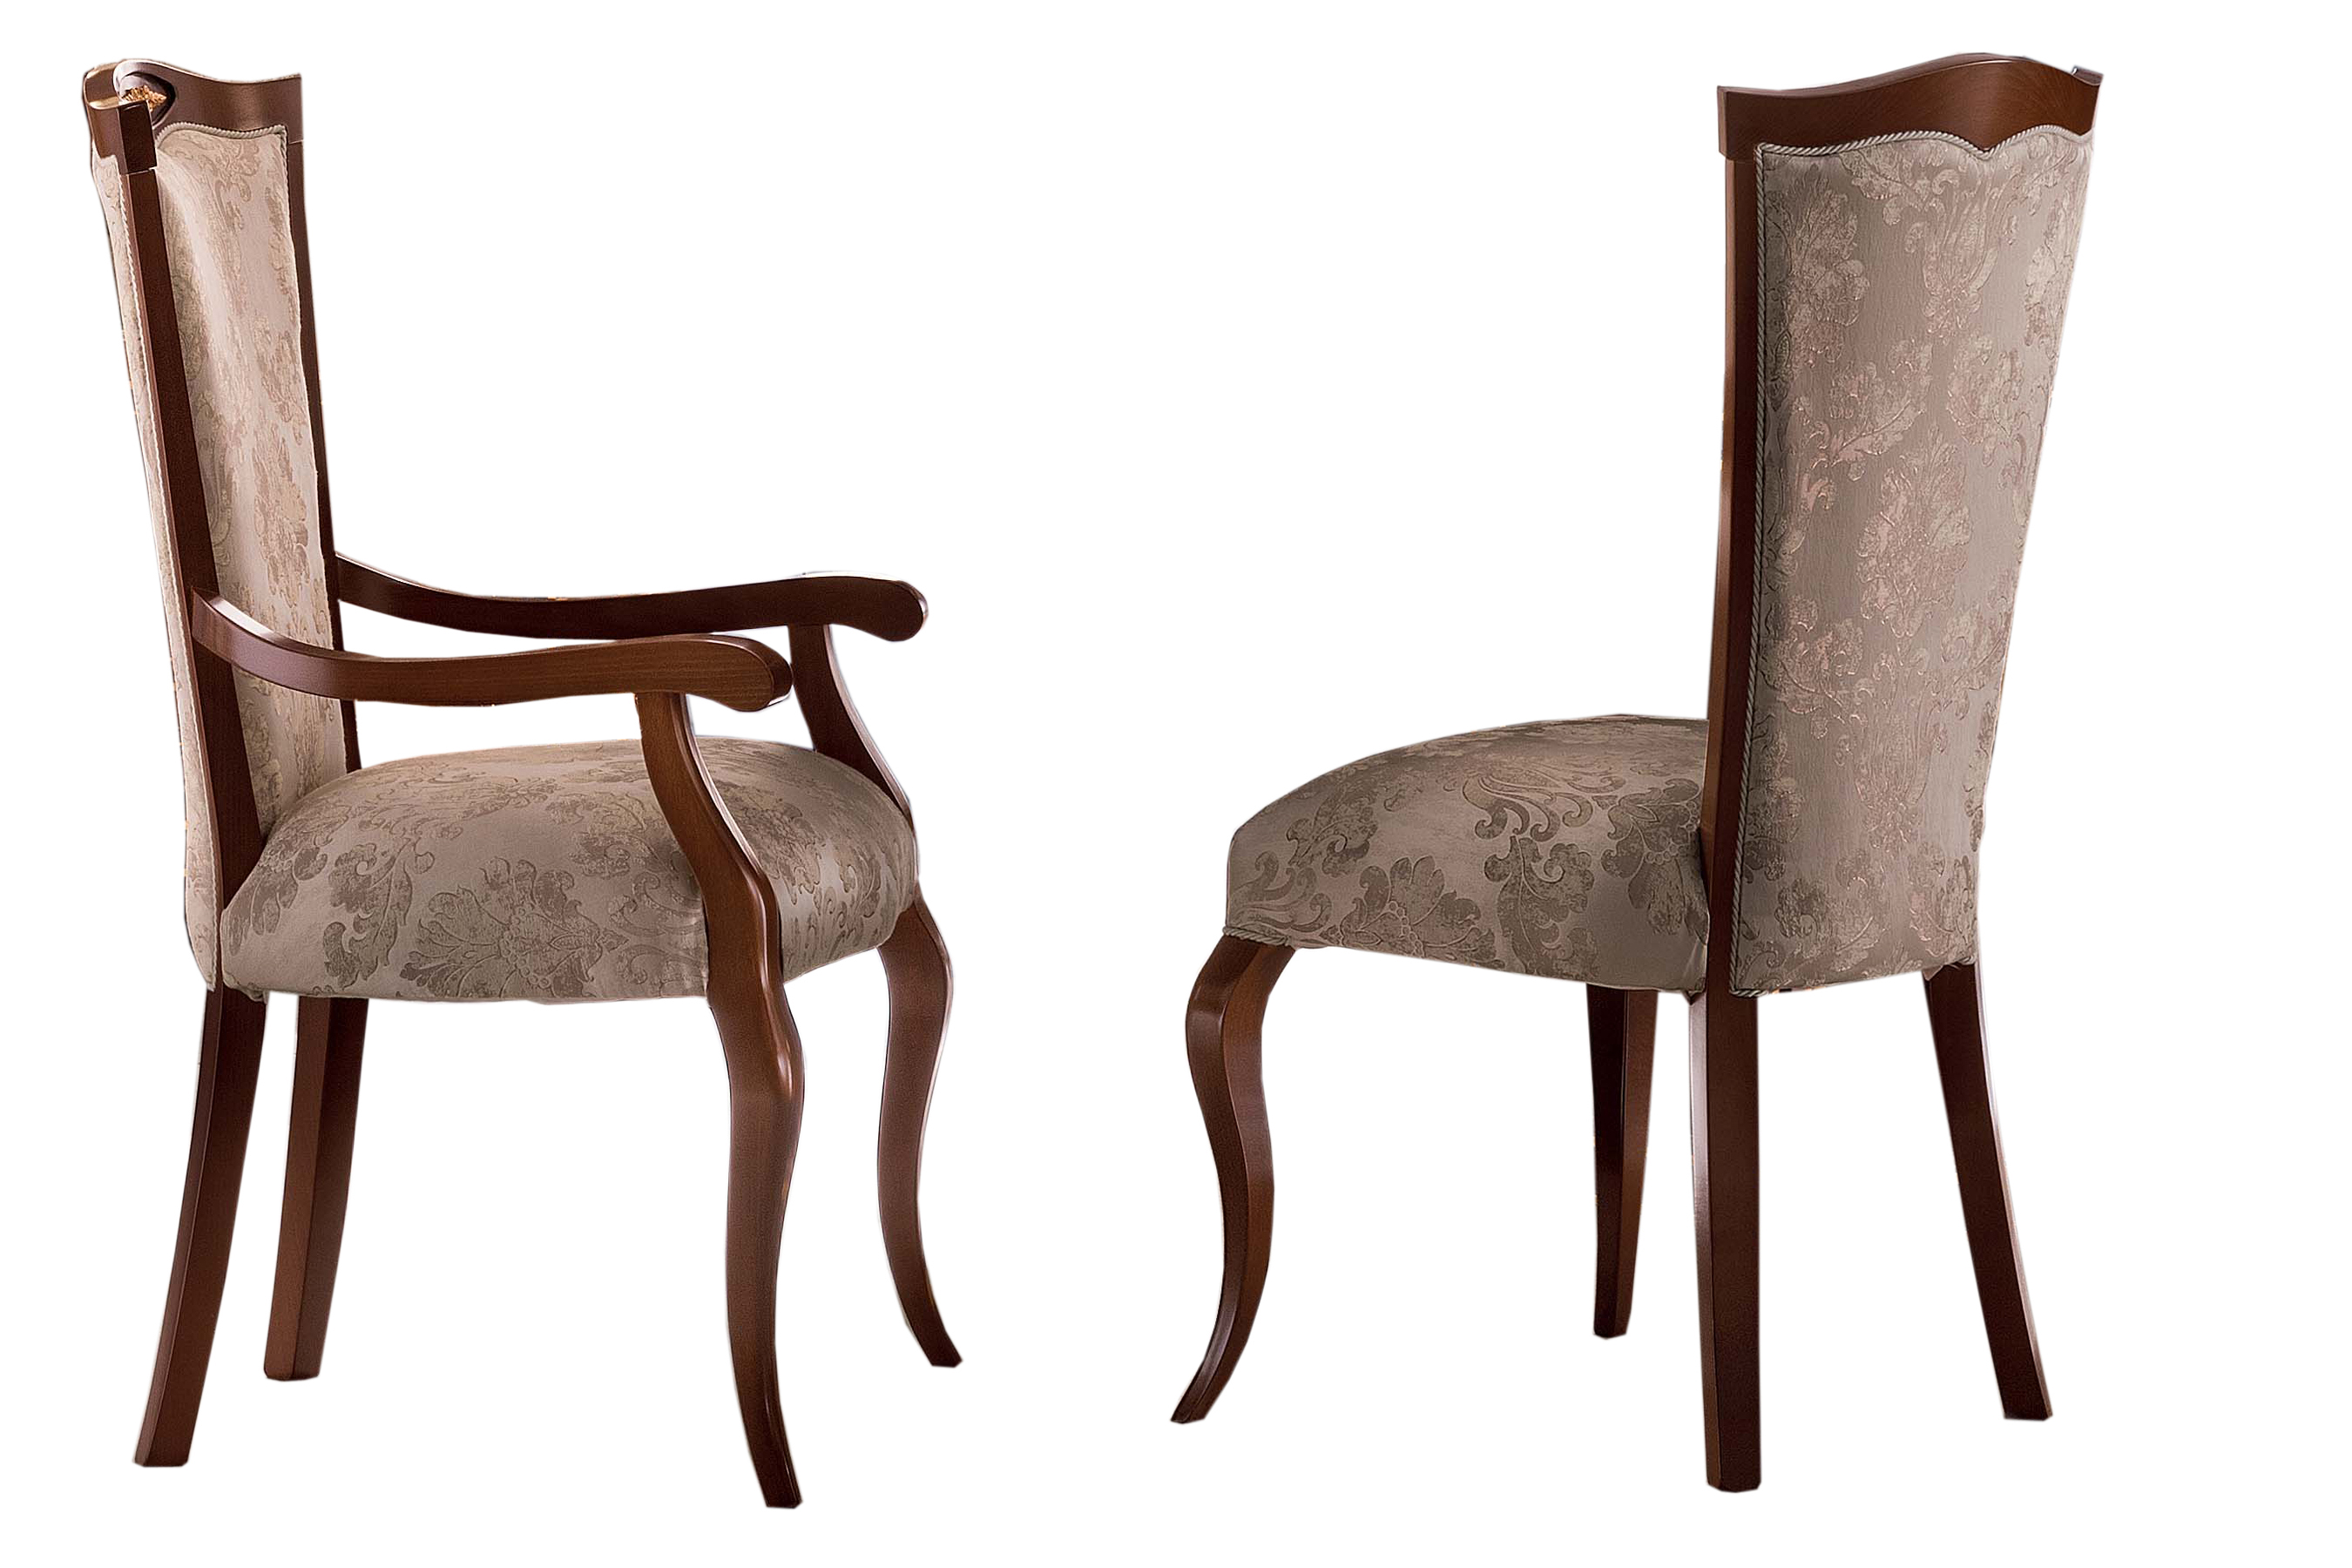 Dining Room Furniture Marble-Look Tables Modigliani Chair by Arredoclassic